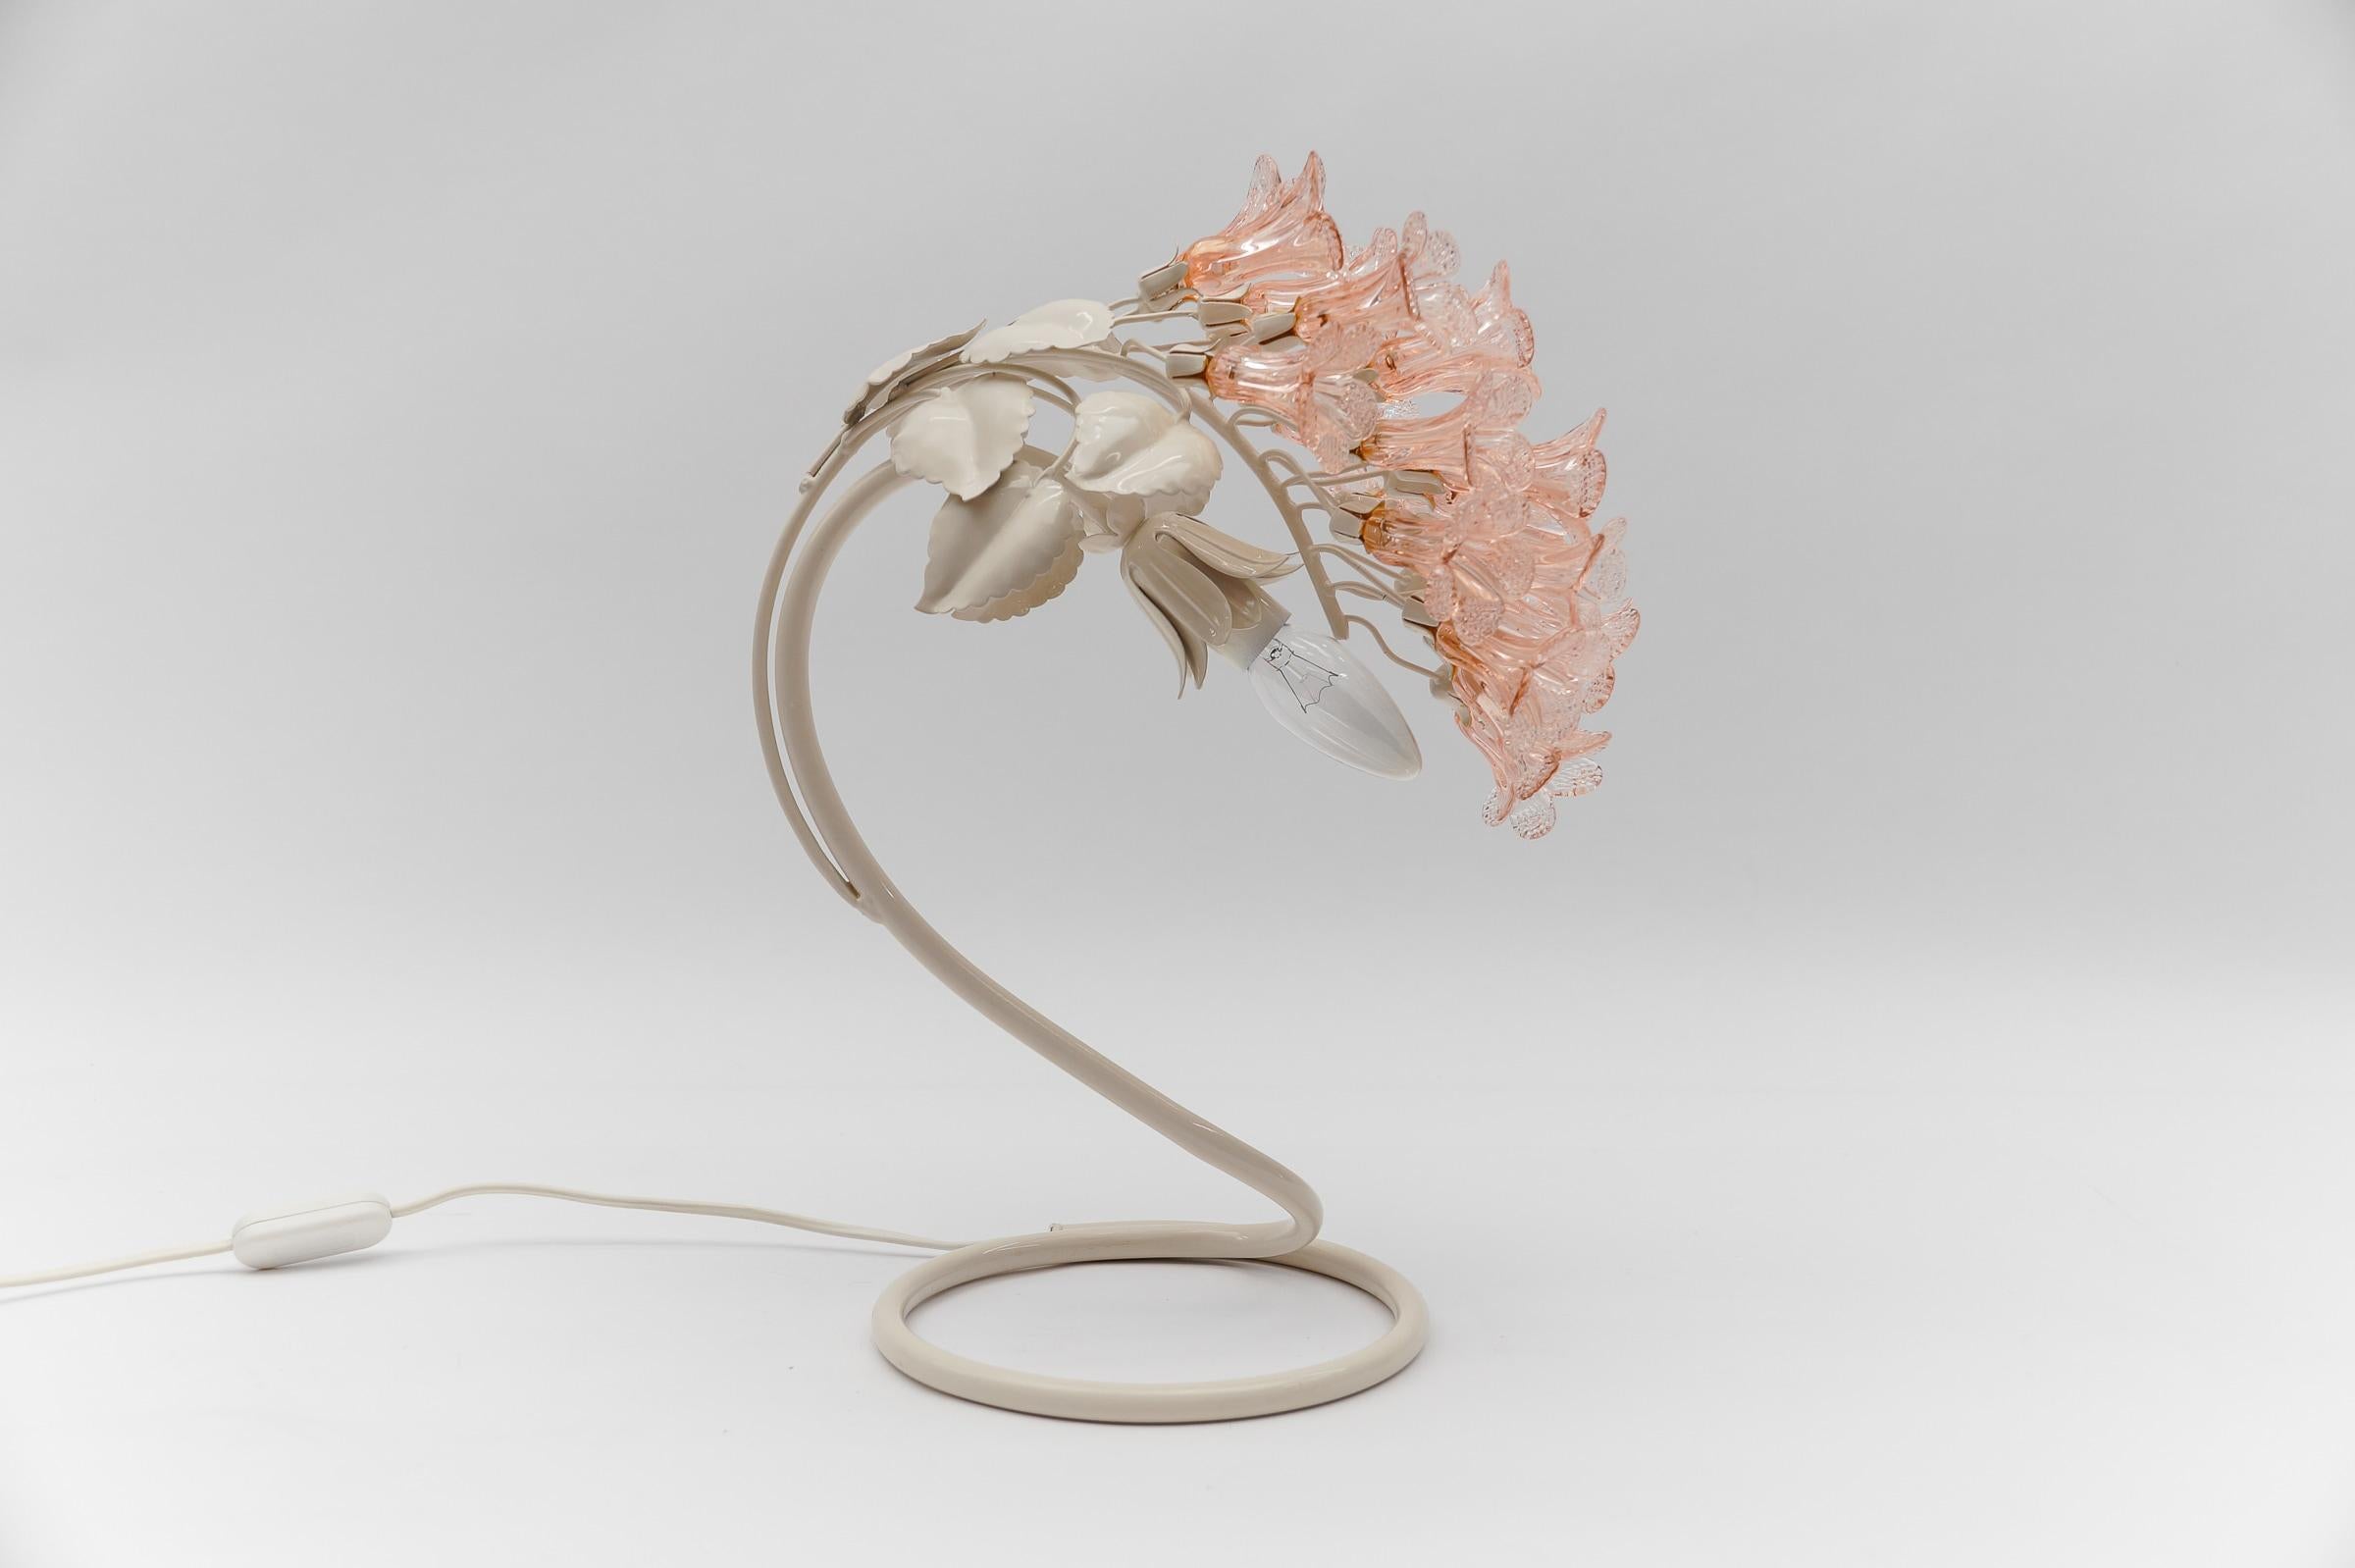 Mid-20th Century Italian Modern Table Lamp made in Pink Murano Glass Flowers, 1960s Italy